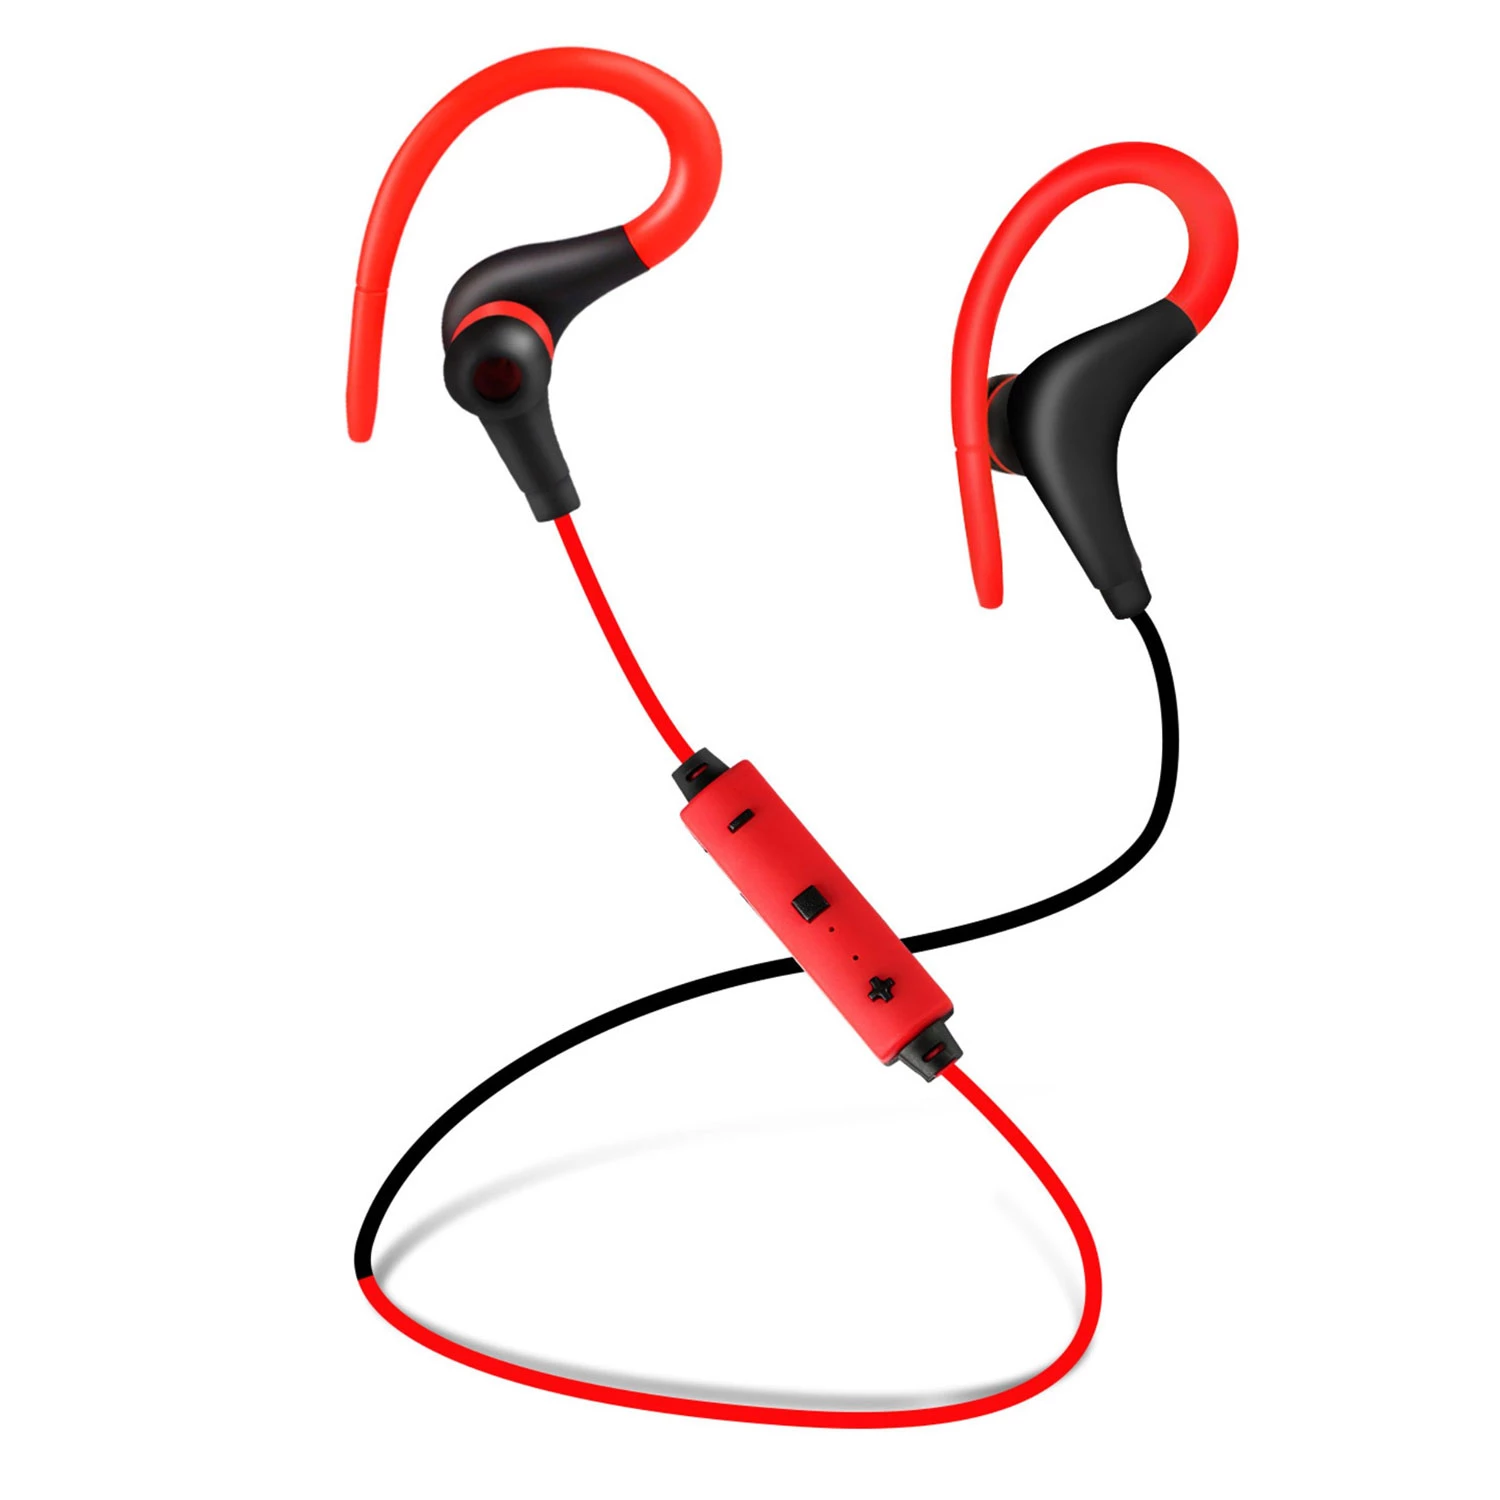 Wireless Sport In-Ear Headphones V4.1 - Sweat-proof, Noise Canceling, Hands-free - for Running, Hiki